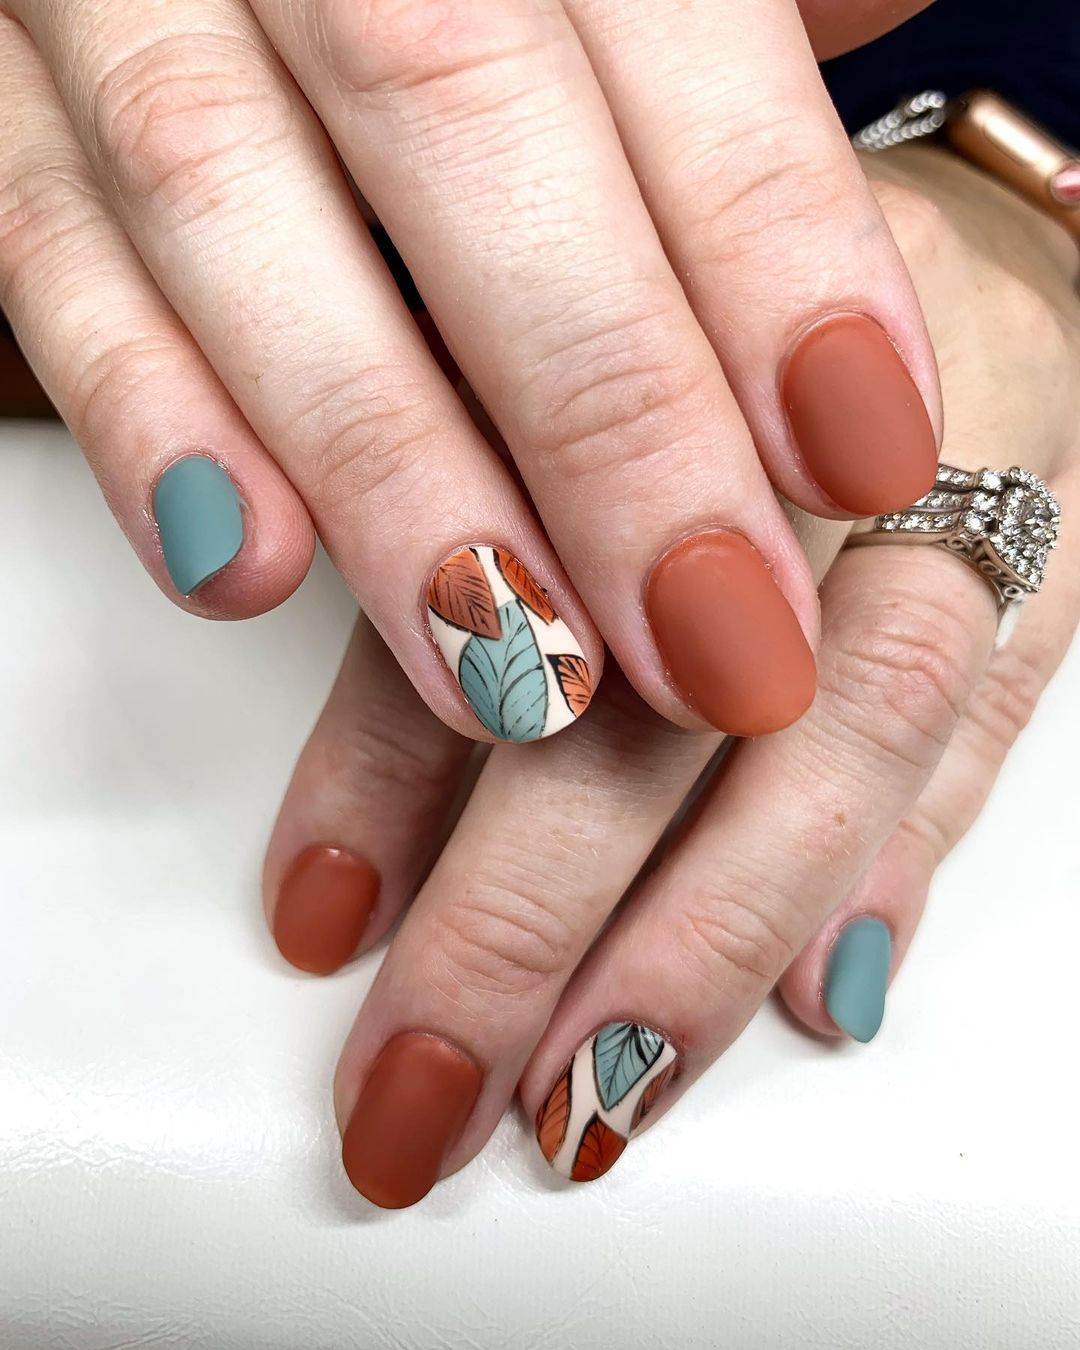 27 Ideas for Fall Themed Nails